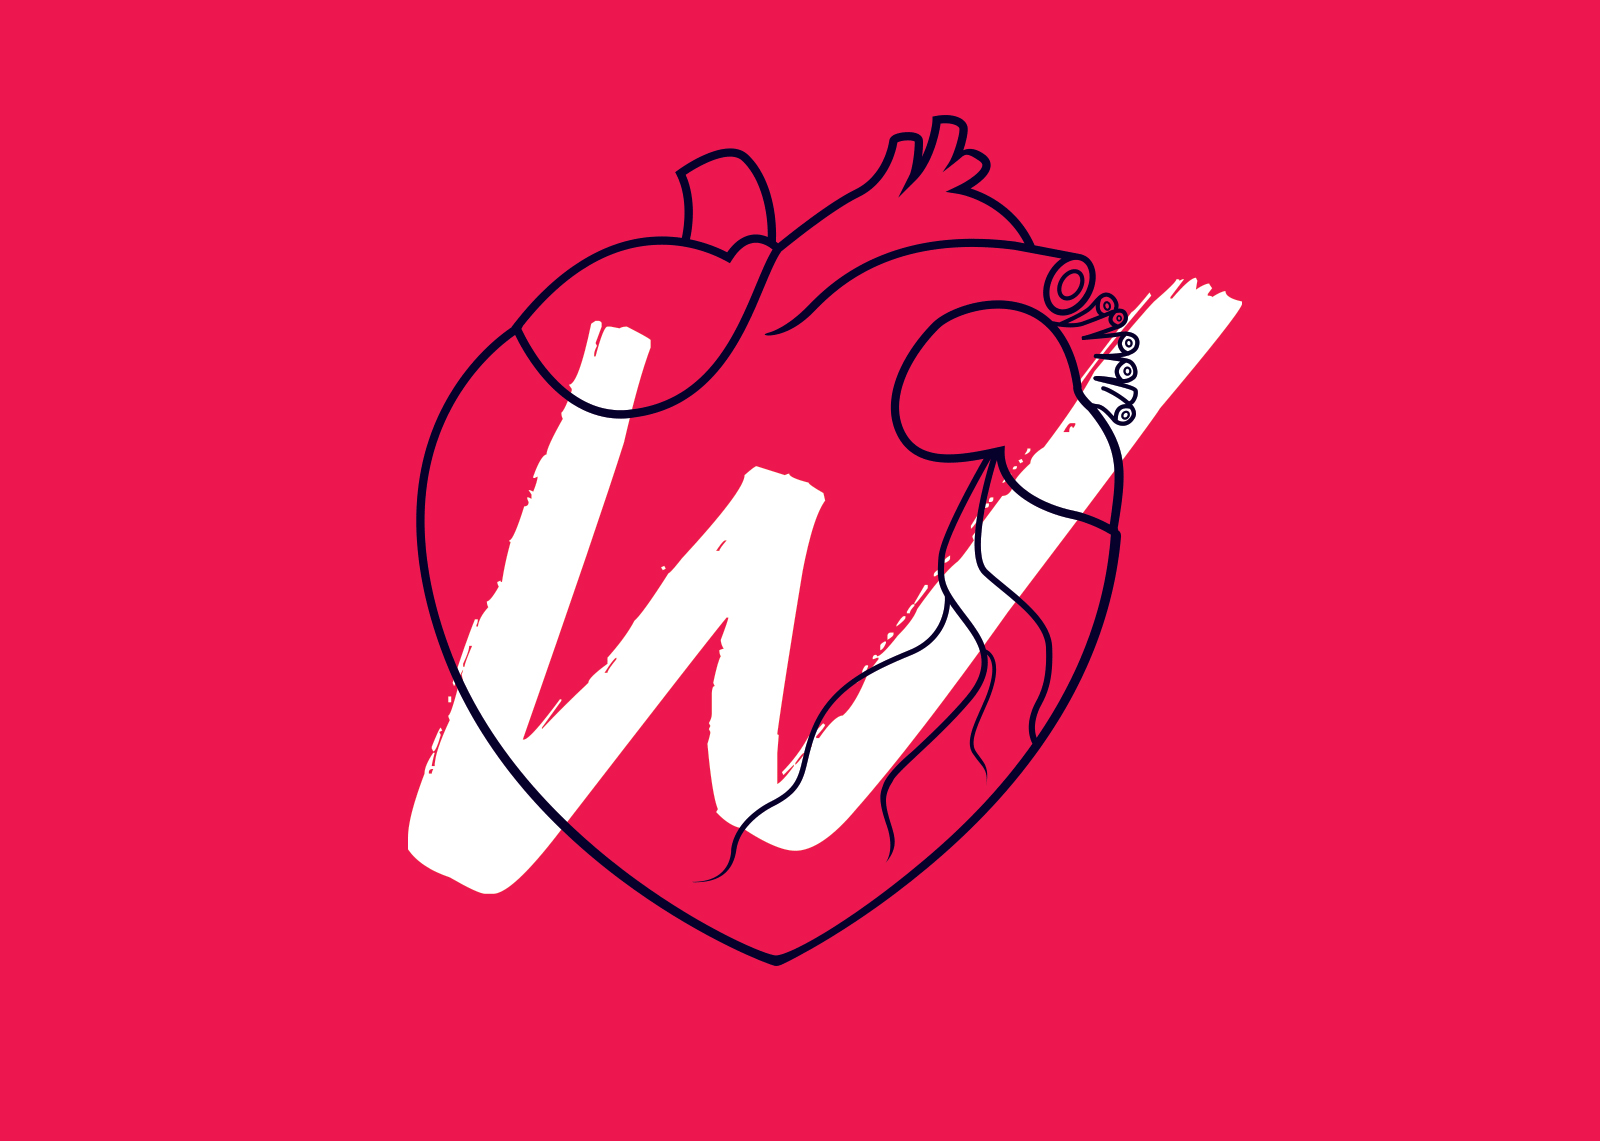 Wild at Heart branding by Nachtraven